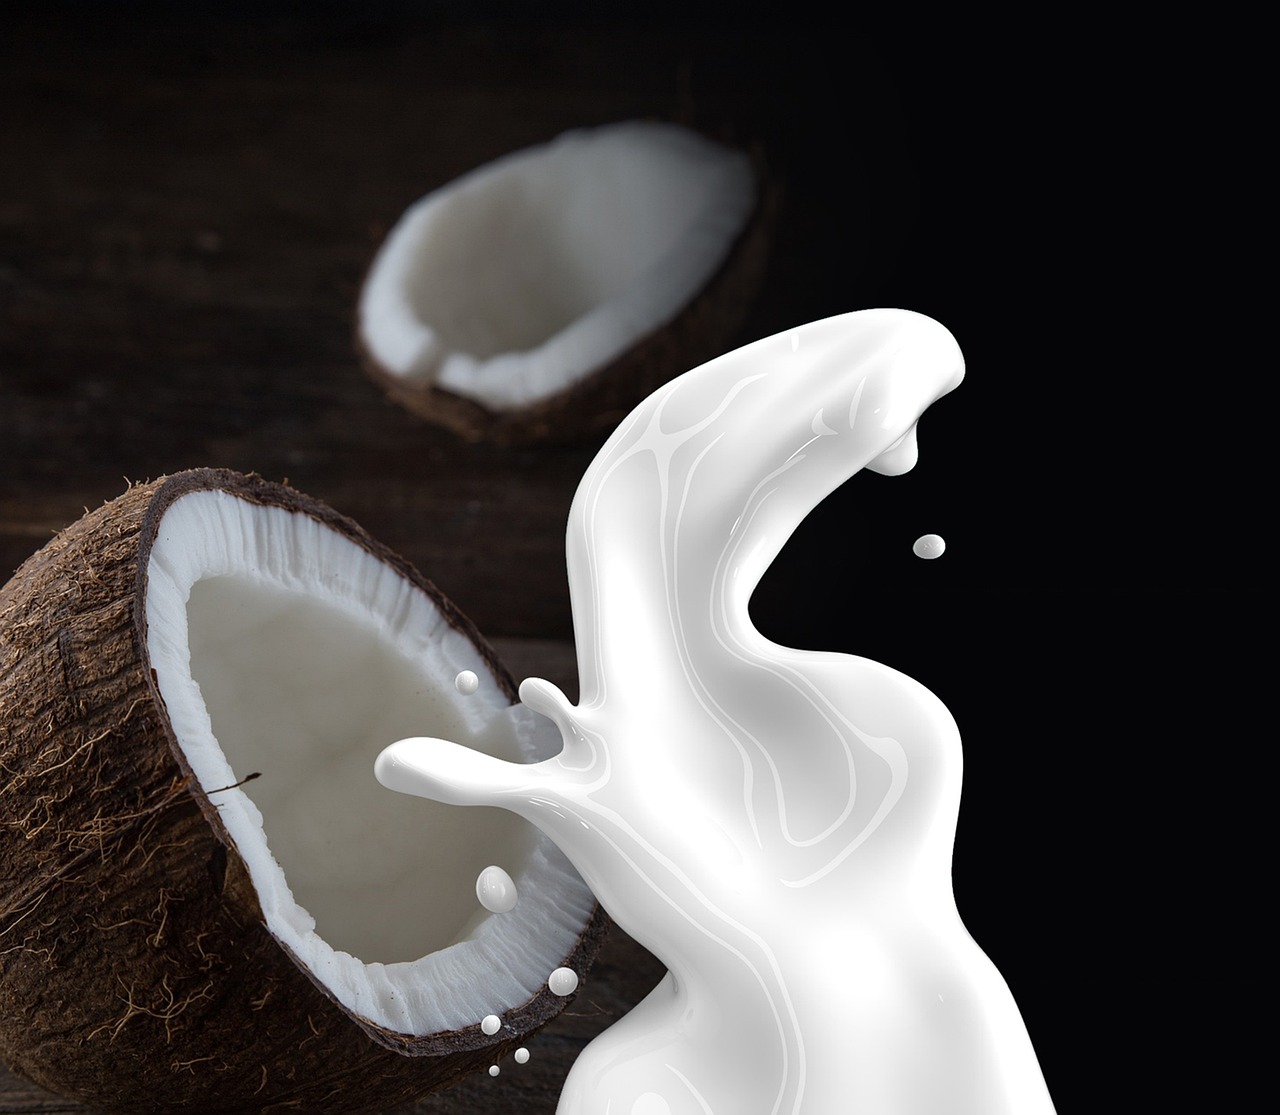 Six Great Reasons to Drink Coconut Milk